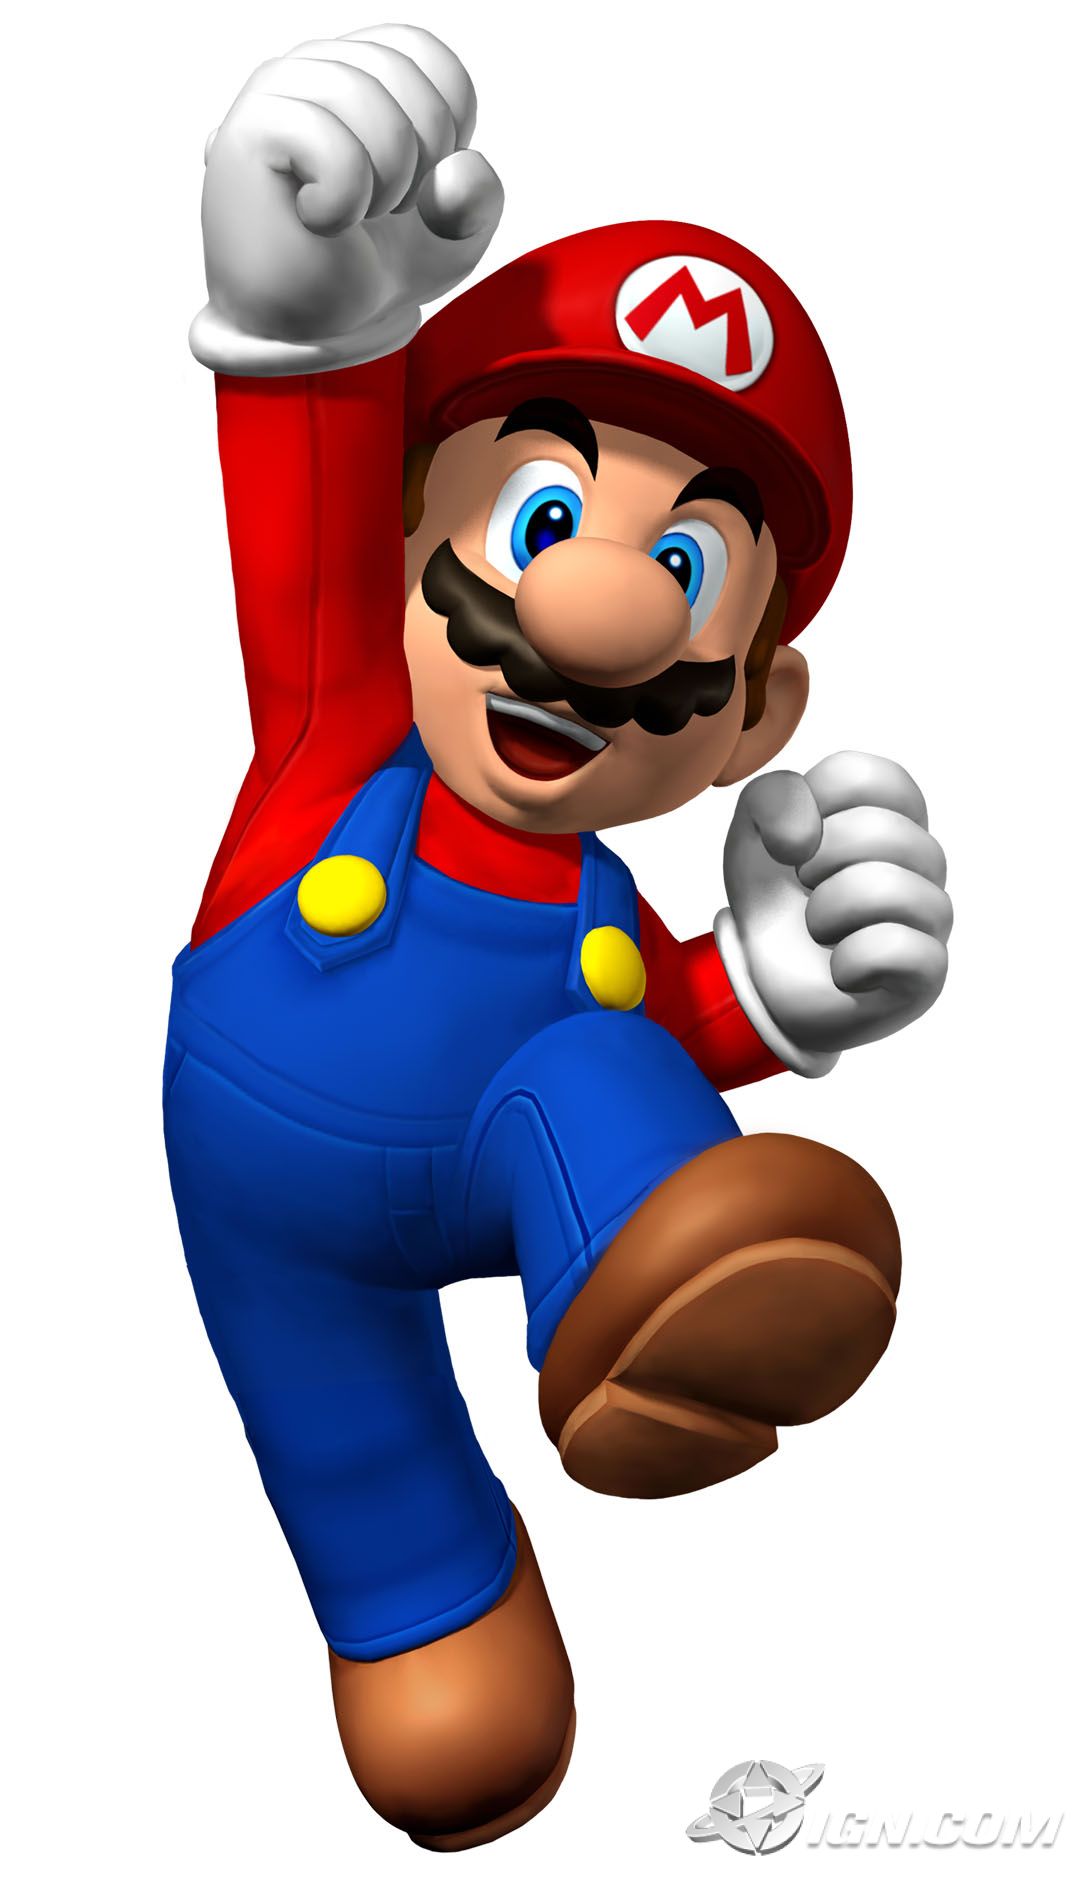 1000+ images about mario bros.